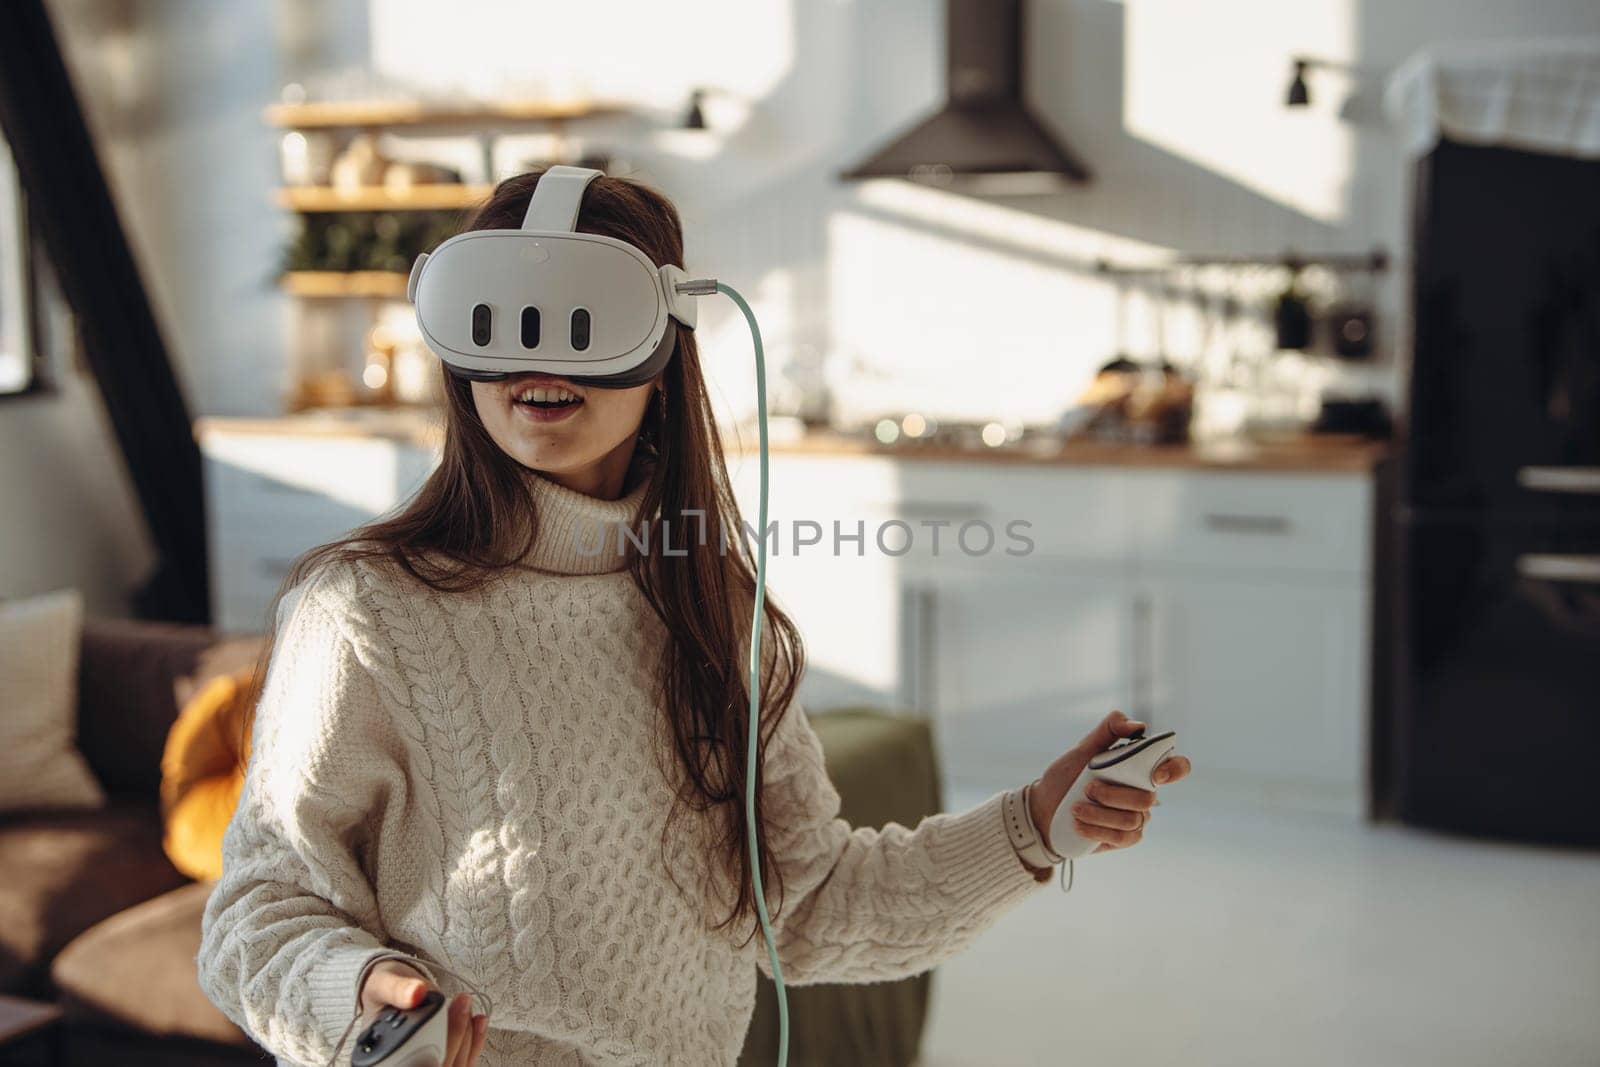 In a sunny ambiance, a lively young girl uses a virtual reality headset. High quality photo